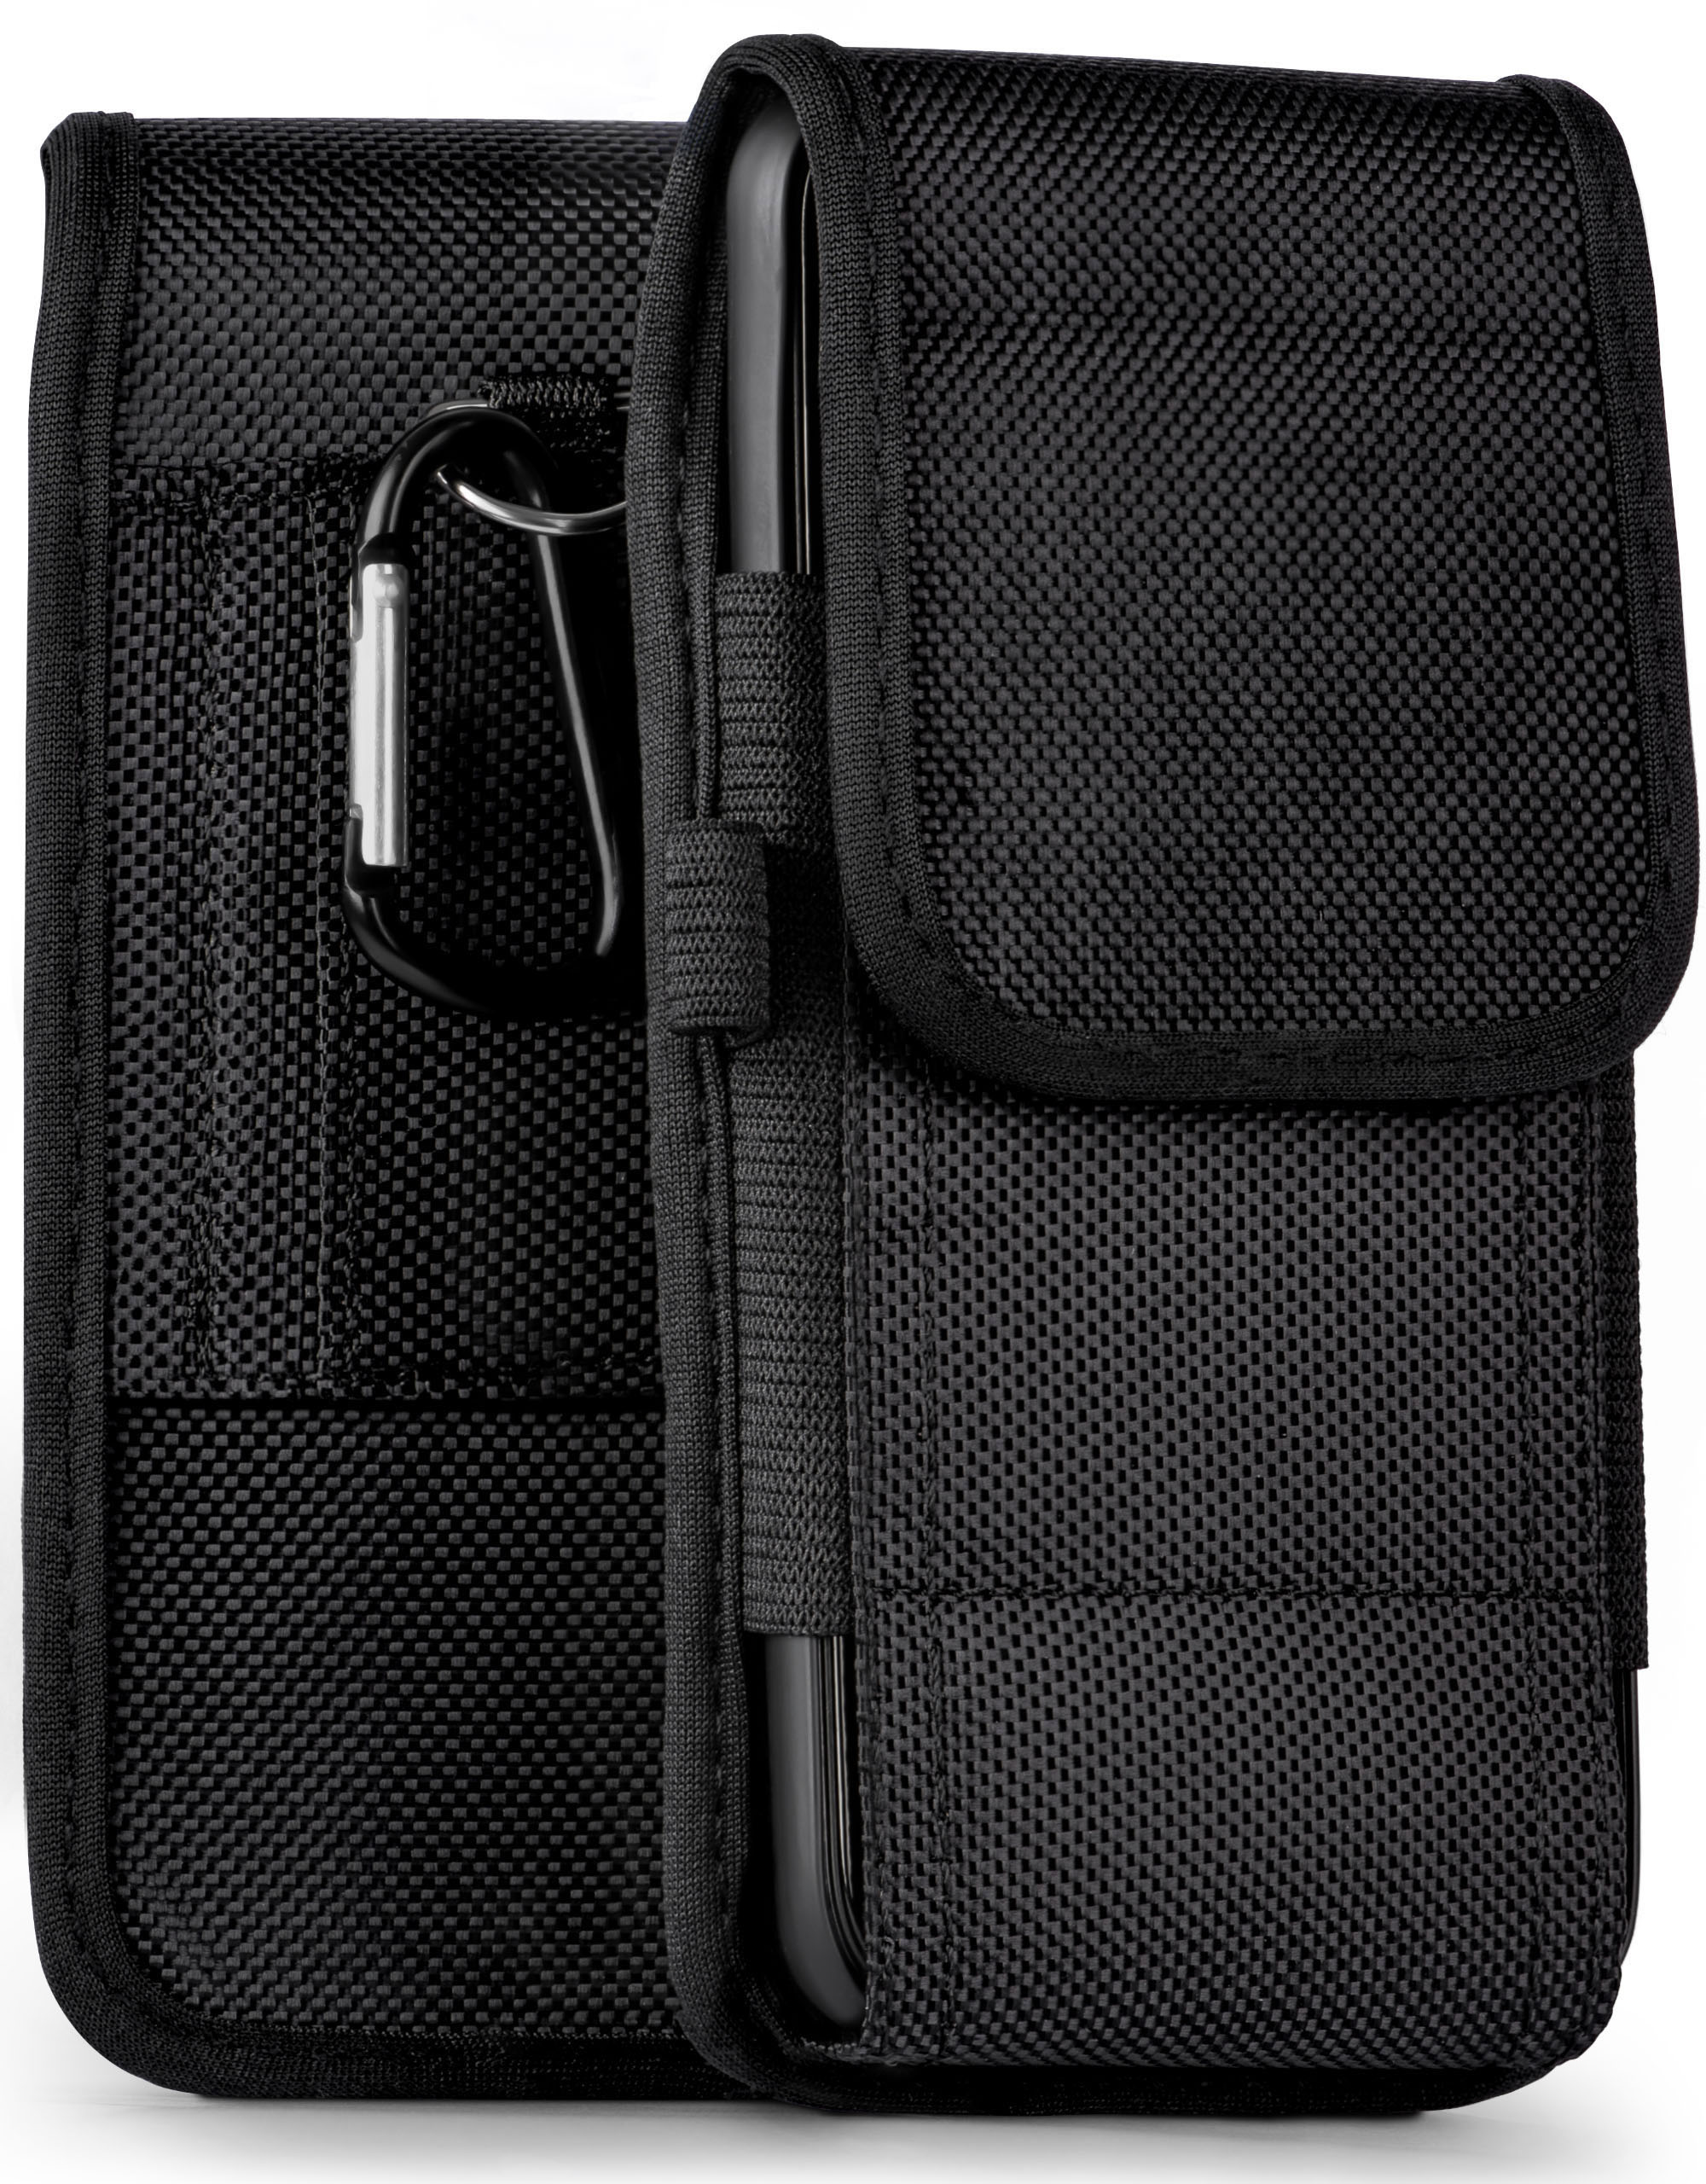 MOEX Agility Case, Holster, Cubot, Trail P40